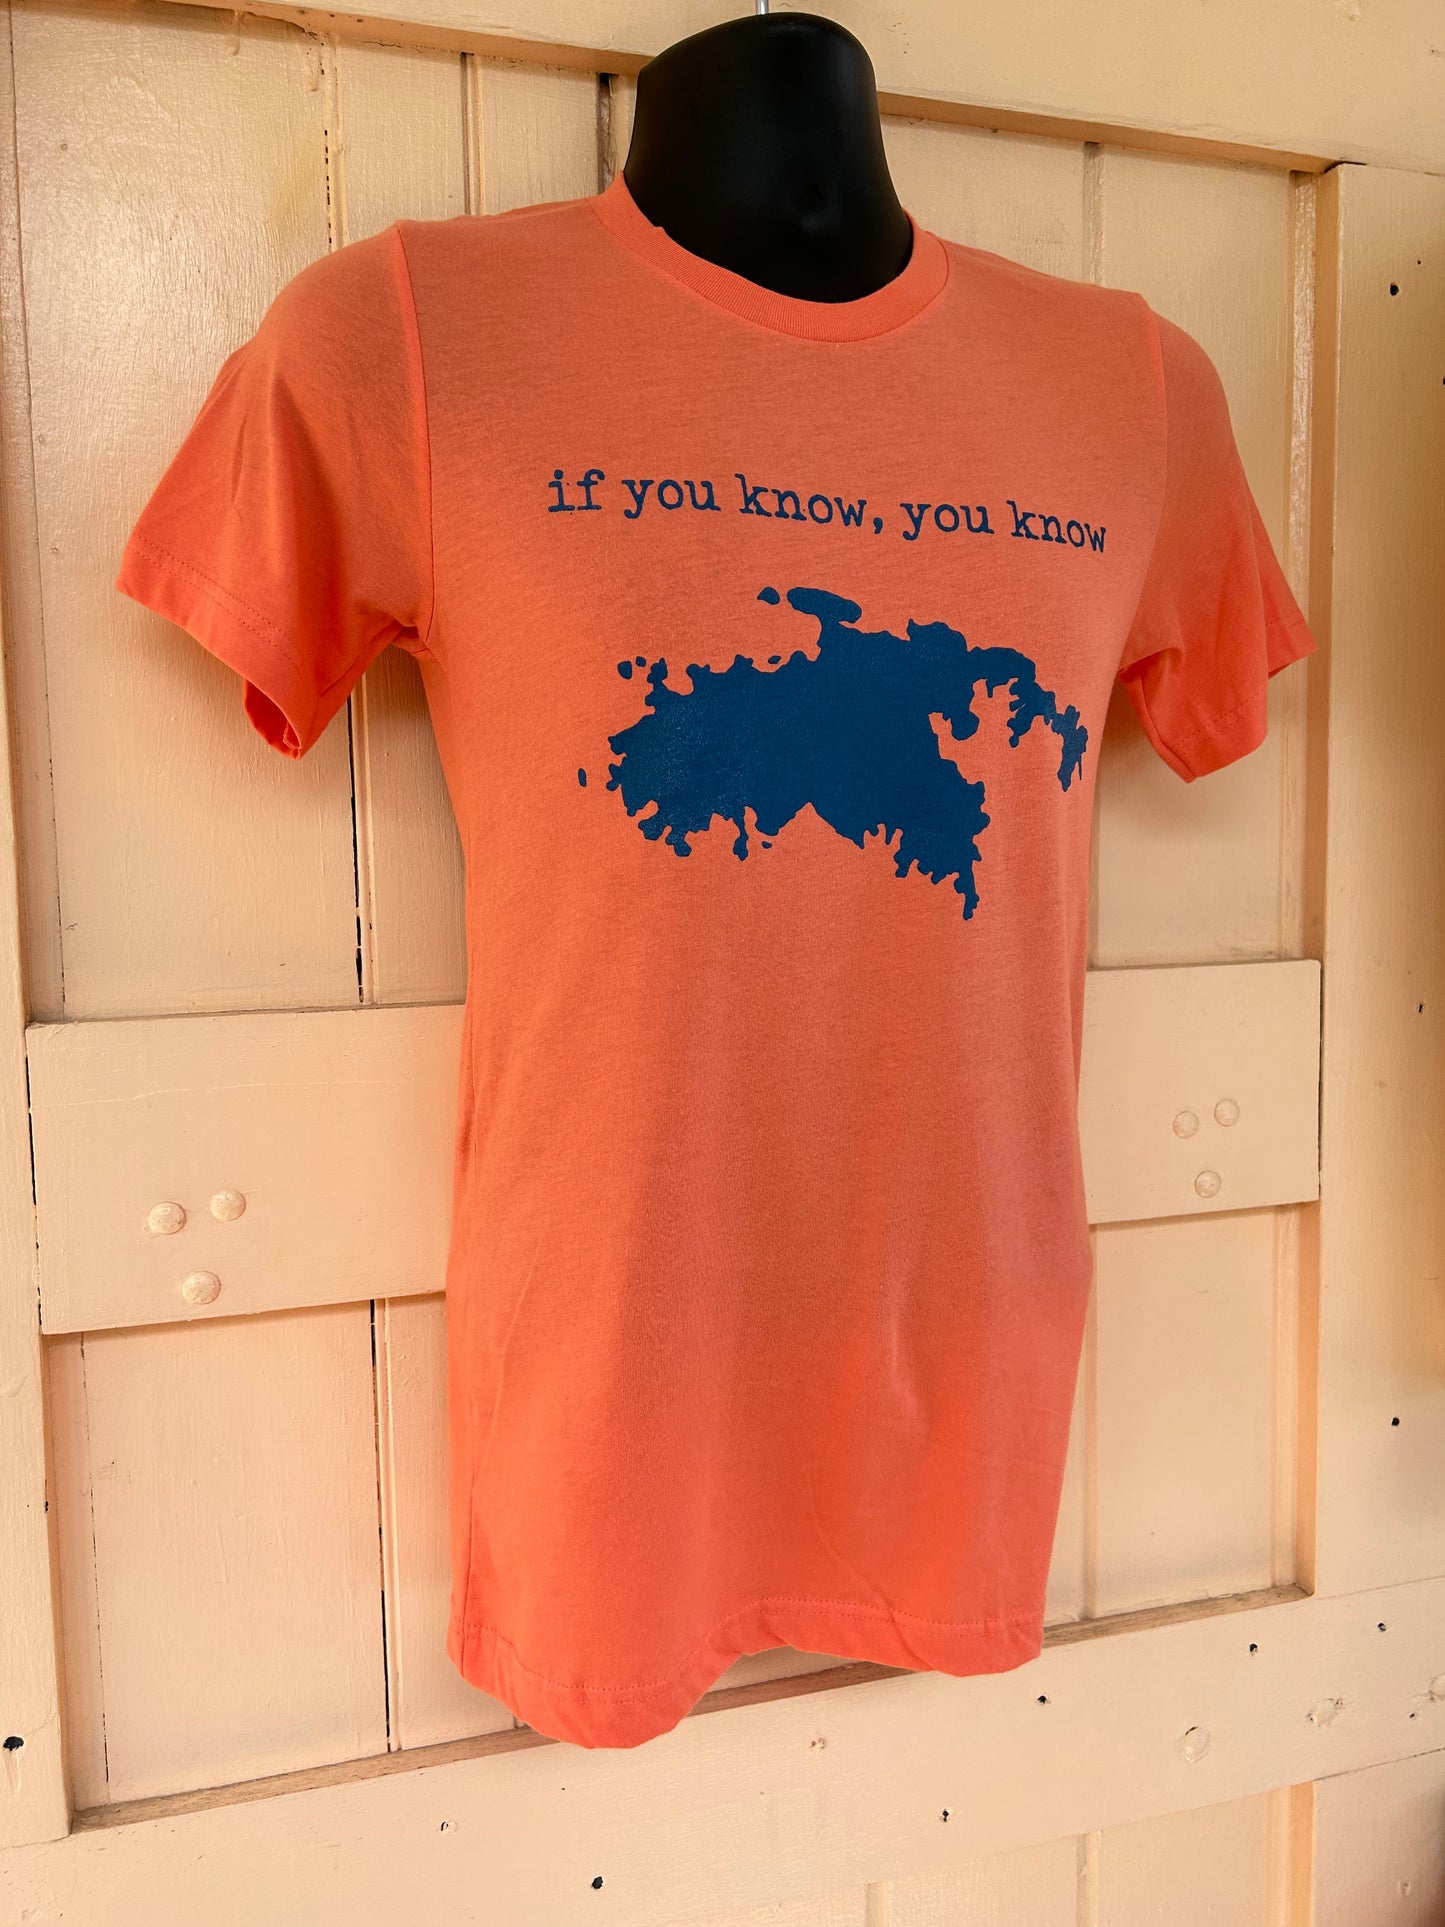 “If You Know, You Know” Tee